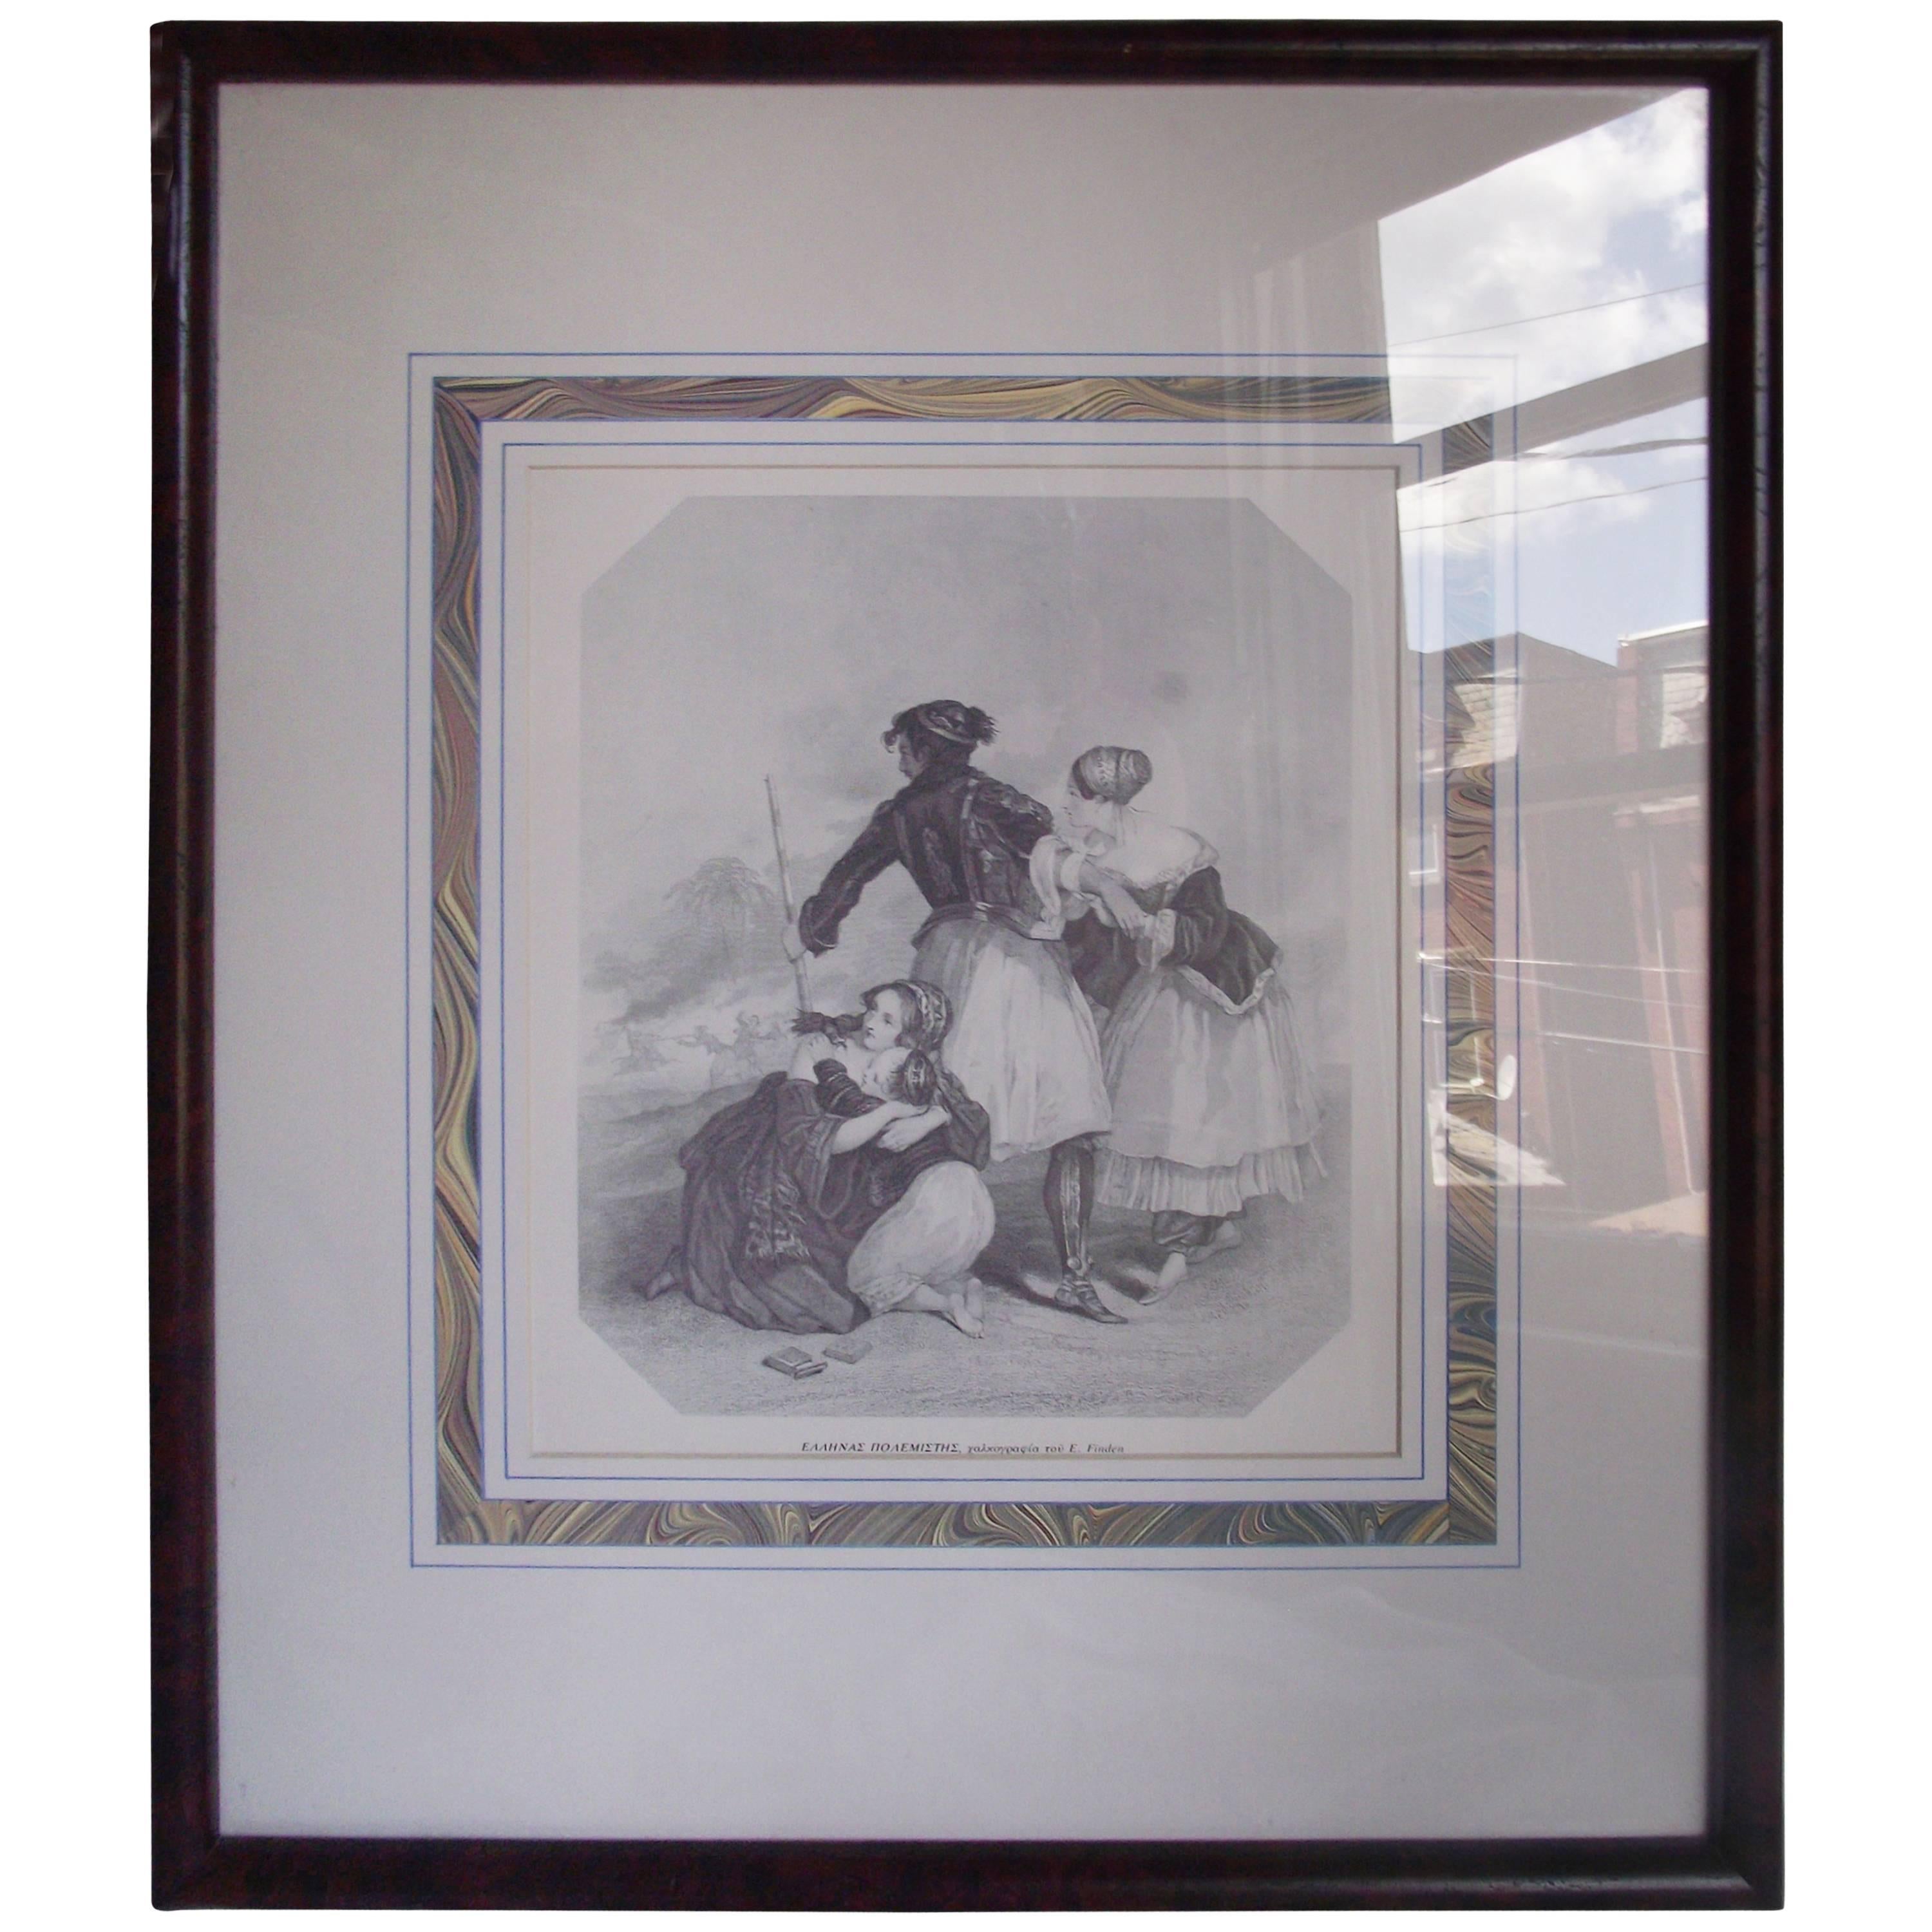 One of five beautifully matted and framed print. Frames have burl wood finish.